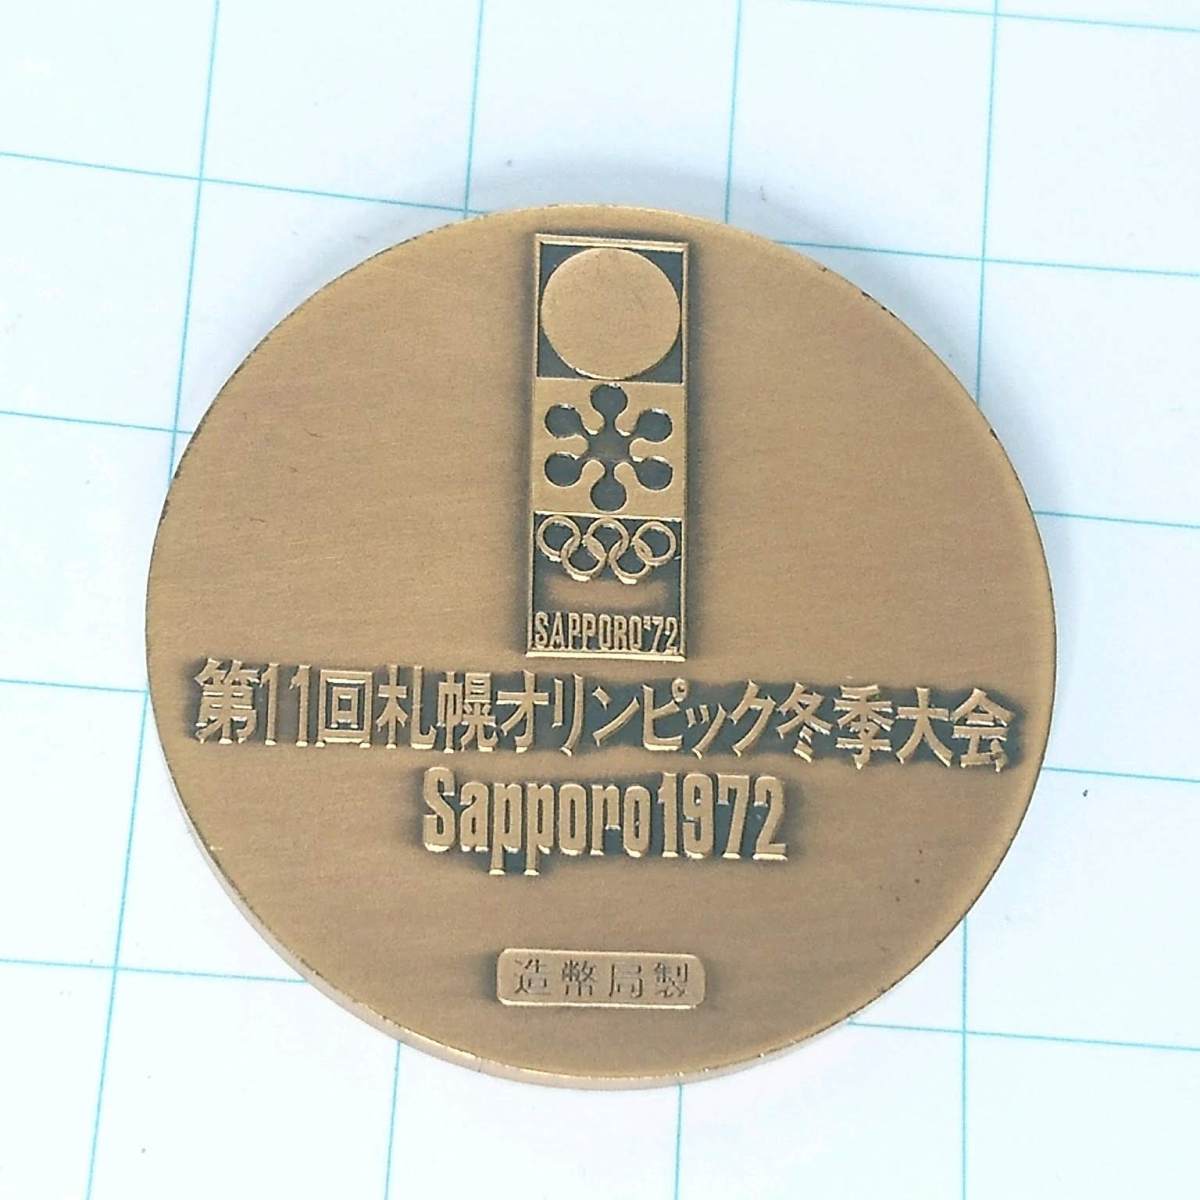  free shipping ) Sapporo Olympic memory medal A05504